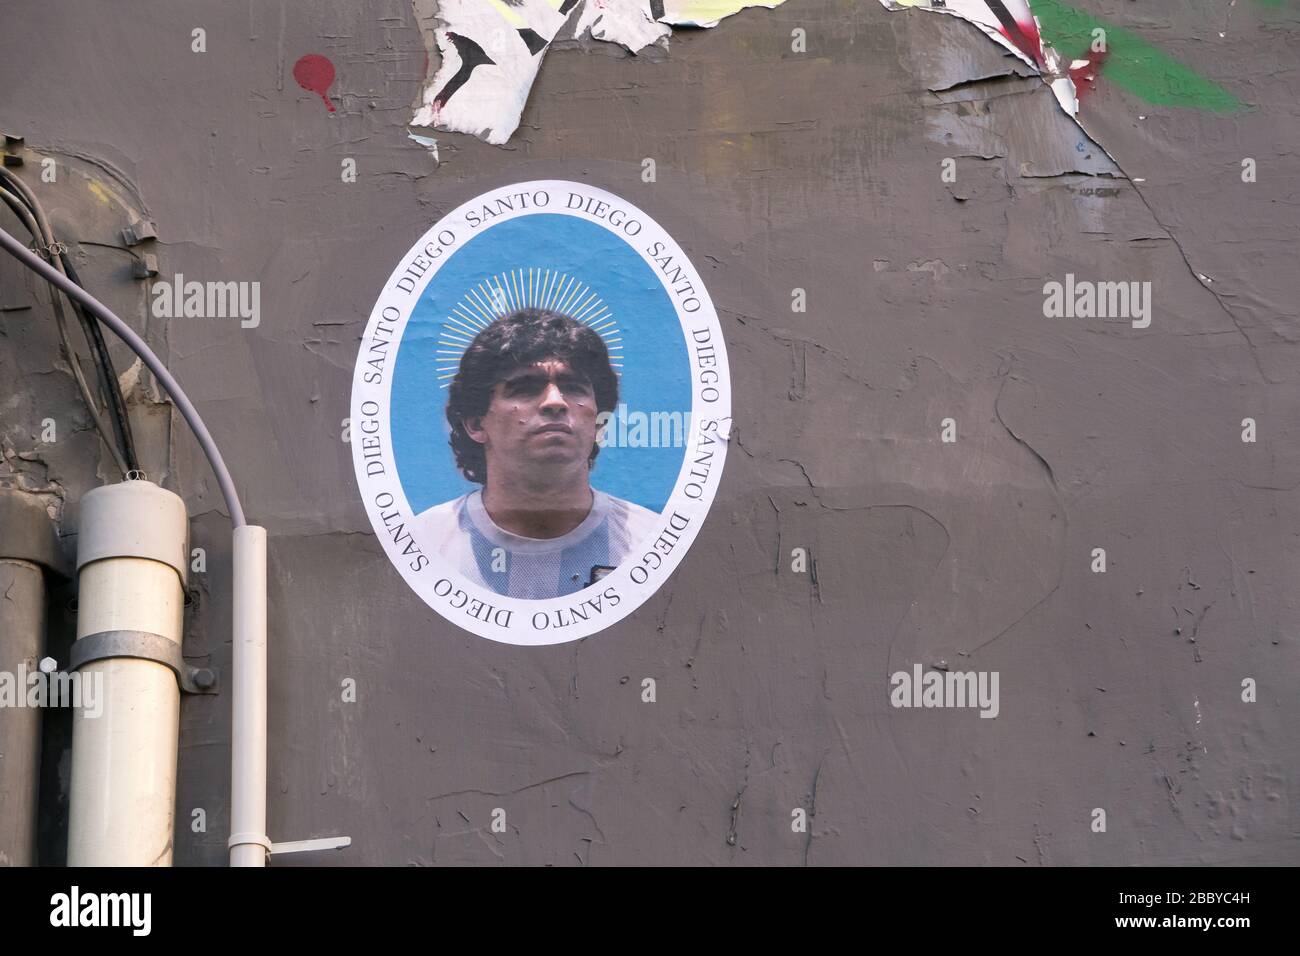 A poster of football player Diego Armando Maradona on a wall in the city center of Naples, Italy. Stock Photo